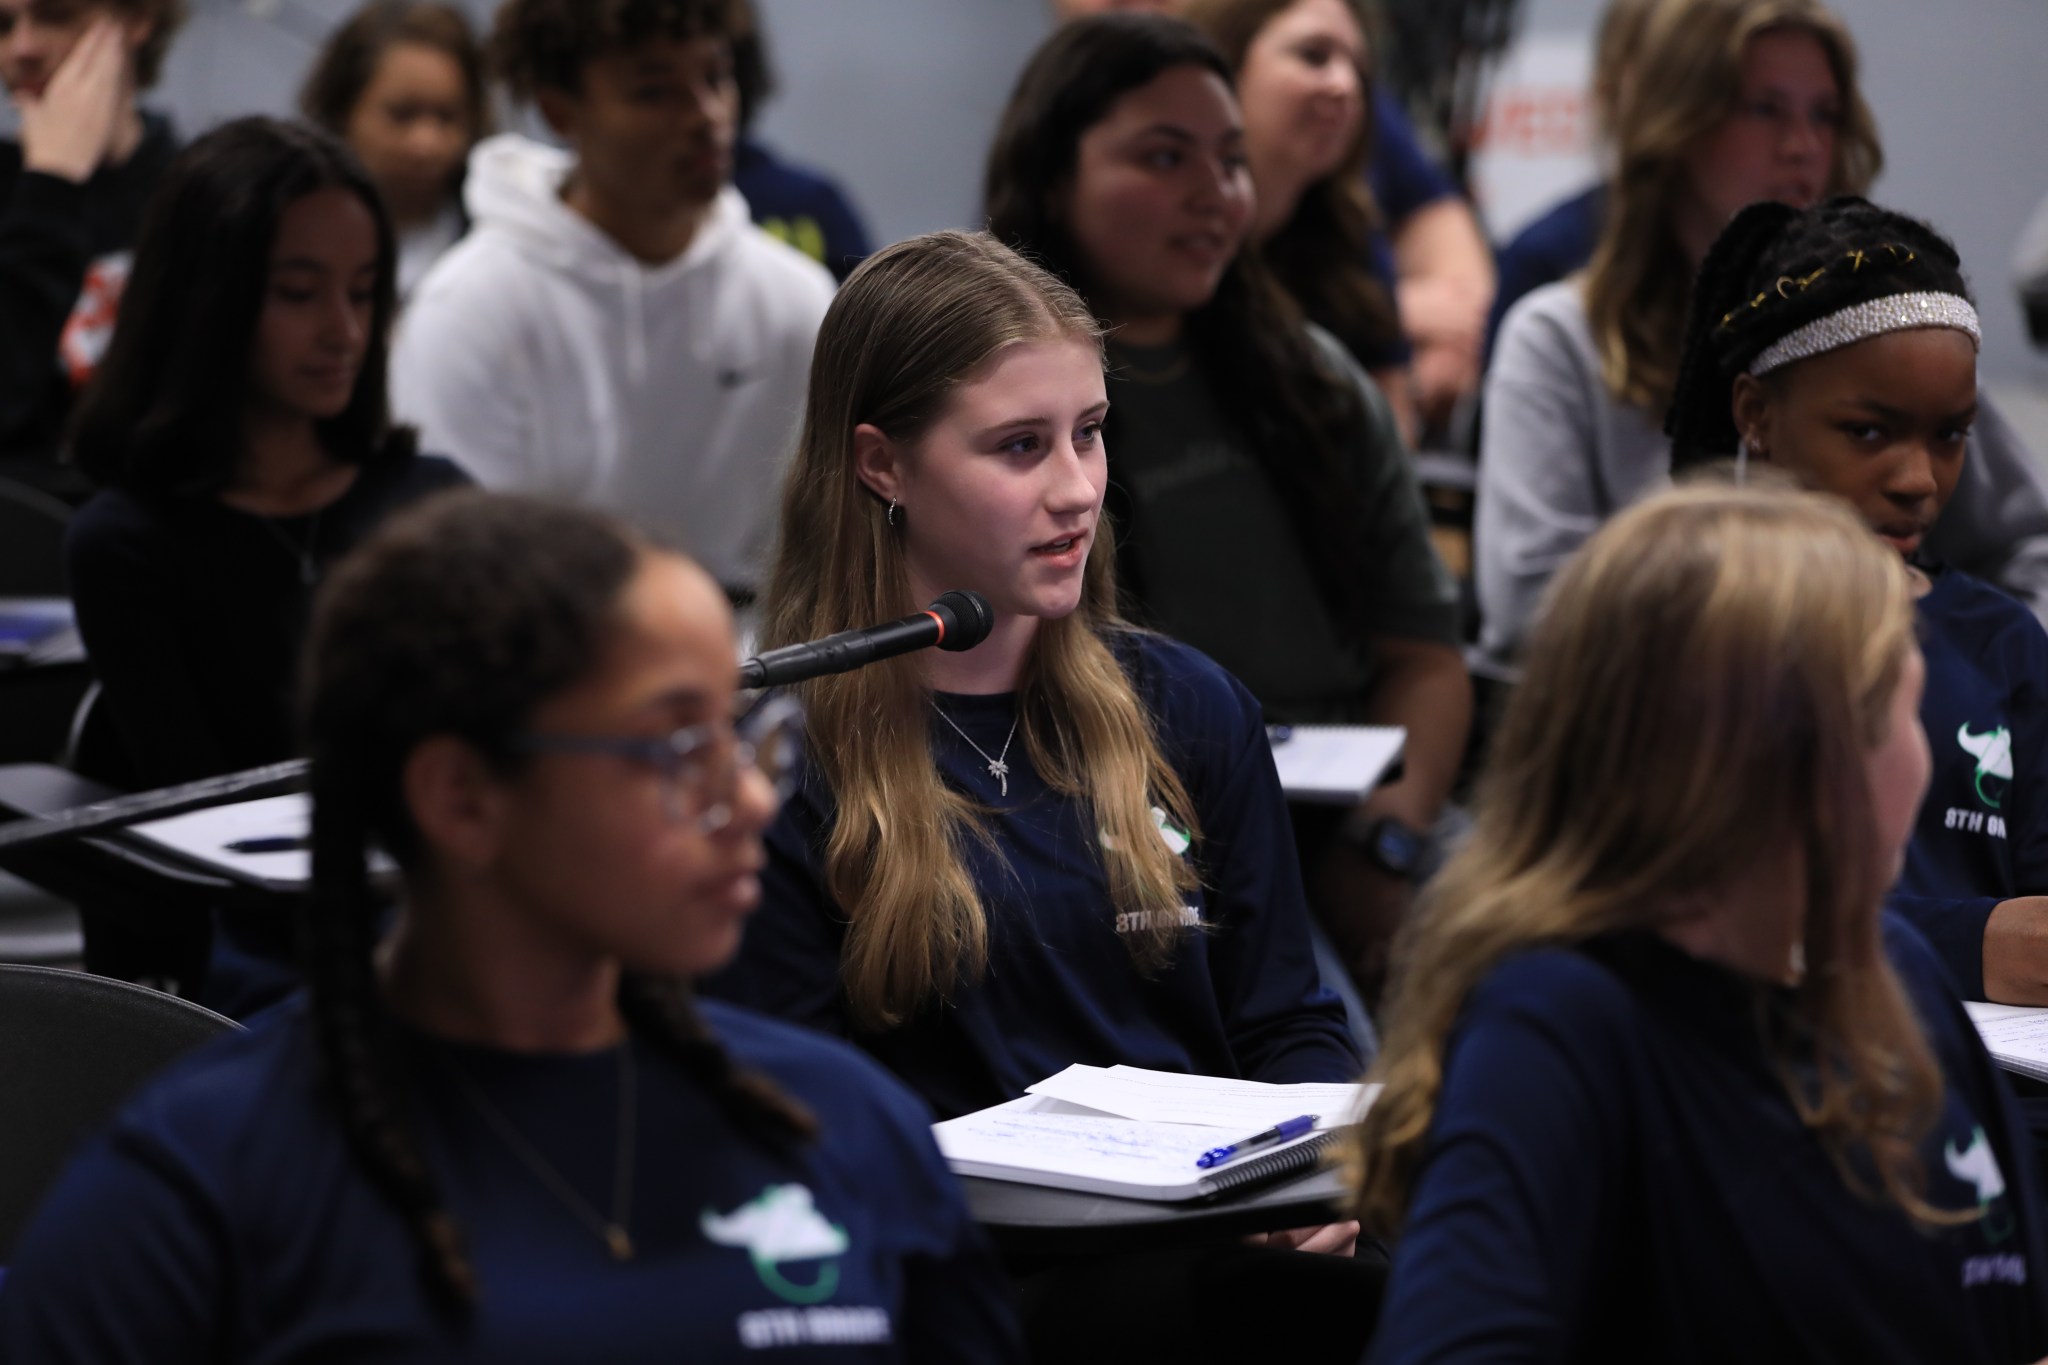 A student asks a question following an Artemis I student media briefing at NASA's Kennedy Space Center in Florida.